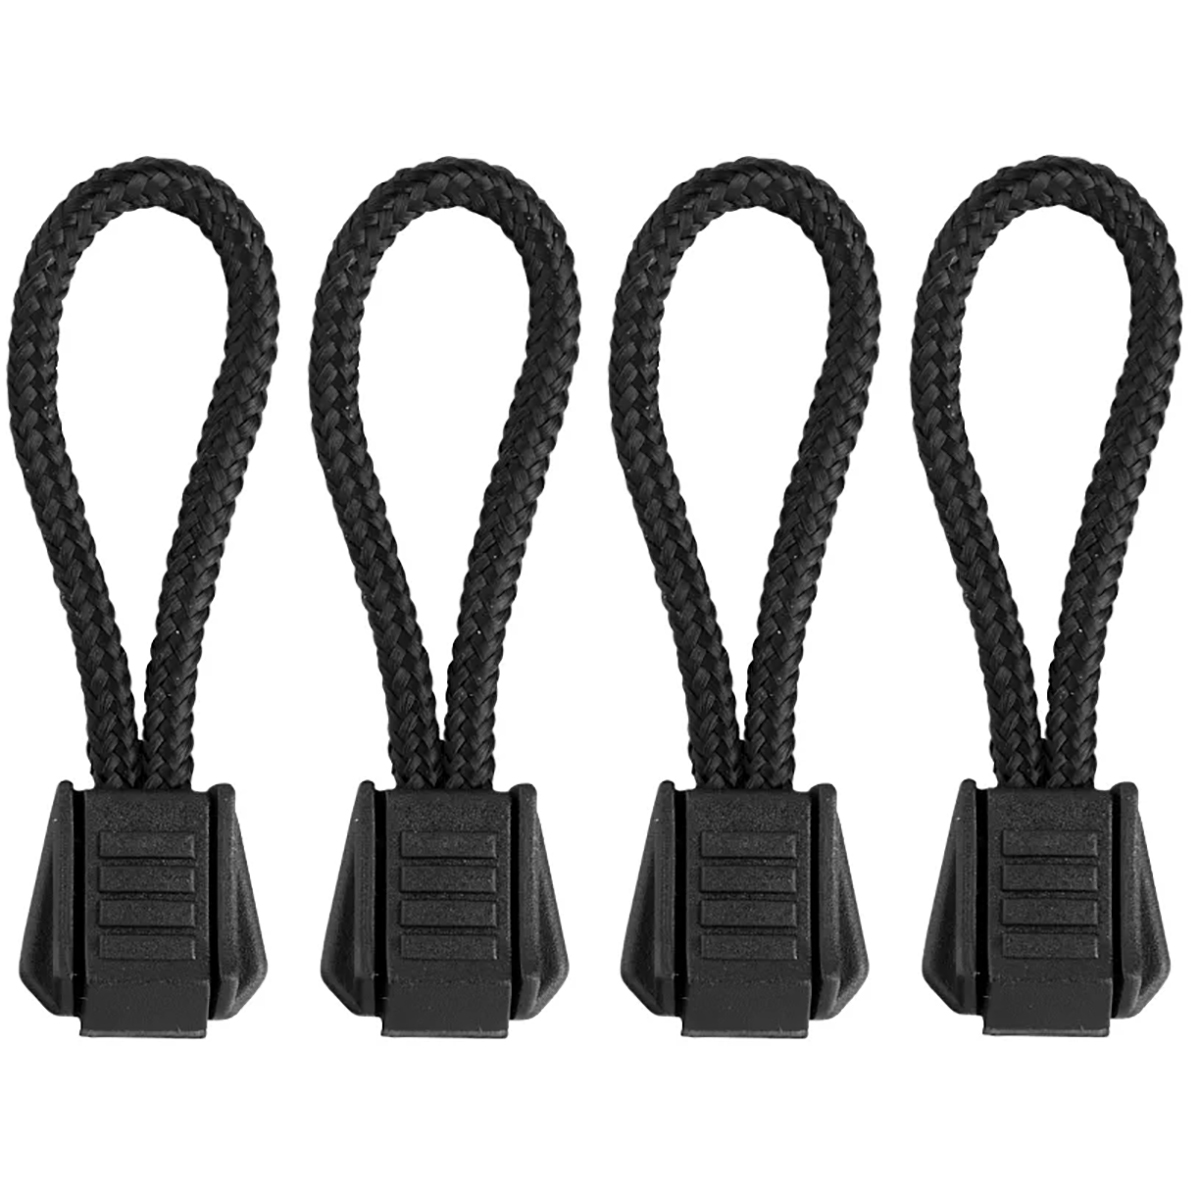 Coghlan's Zipper Pulls (4 Pack), Replacements for Jackets, Coats, Sleeping  Bags 